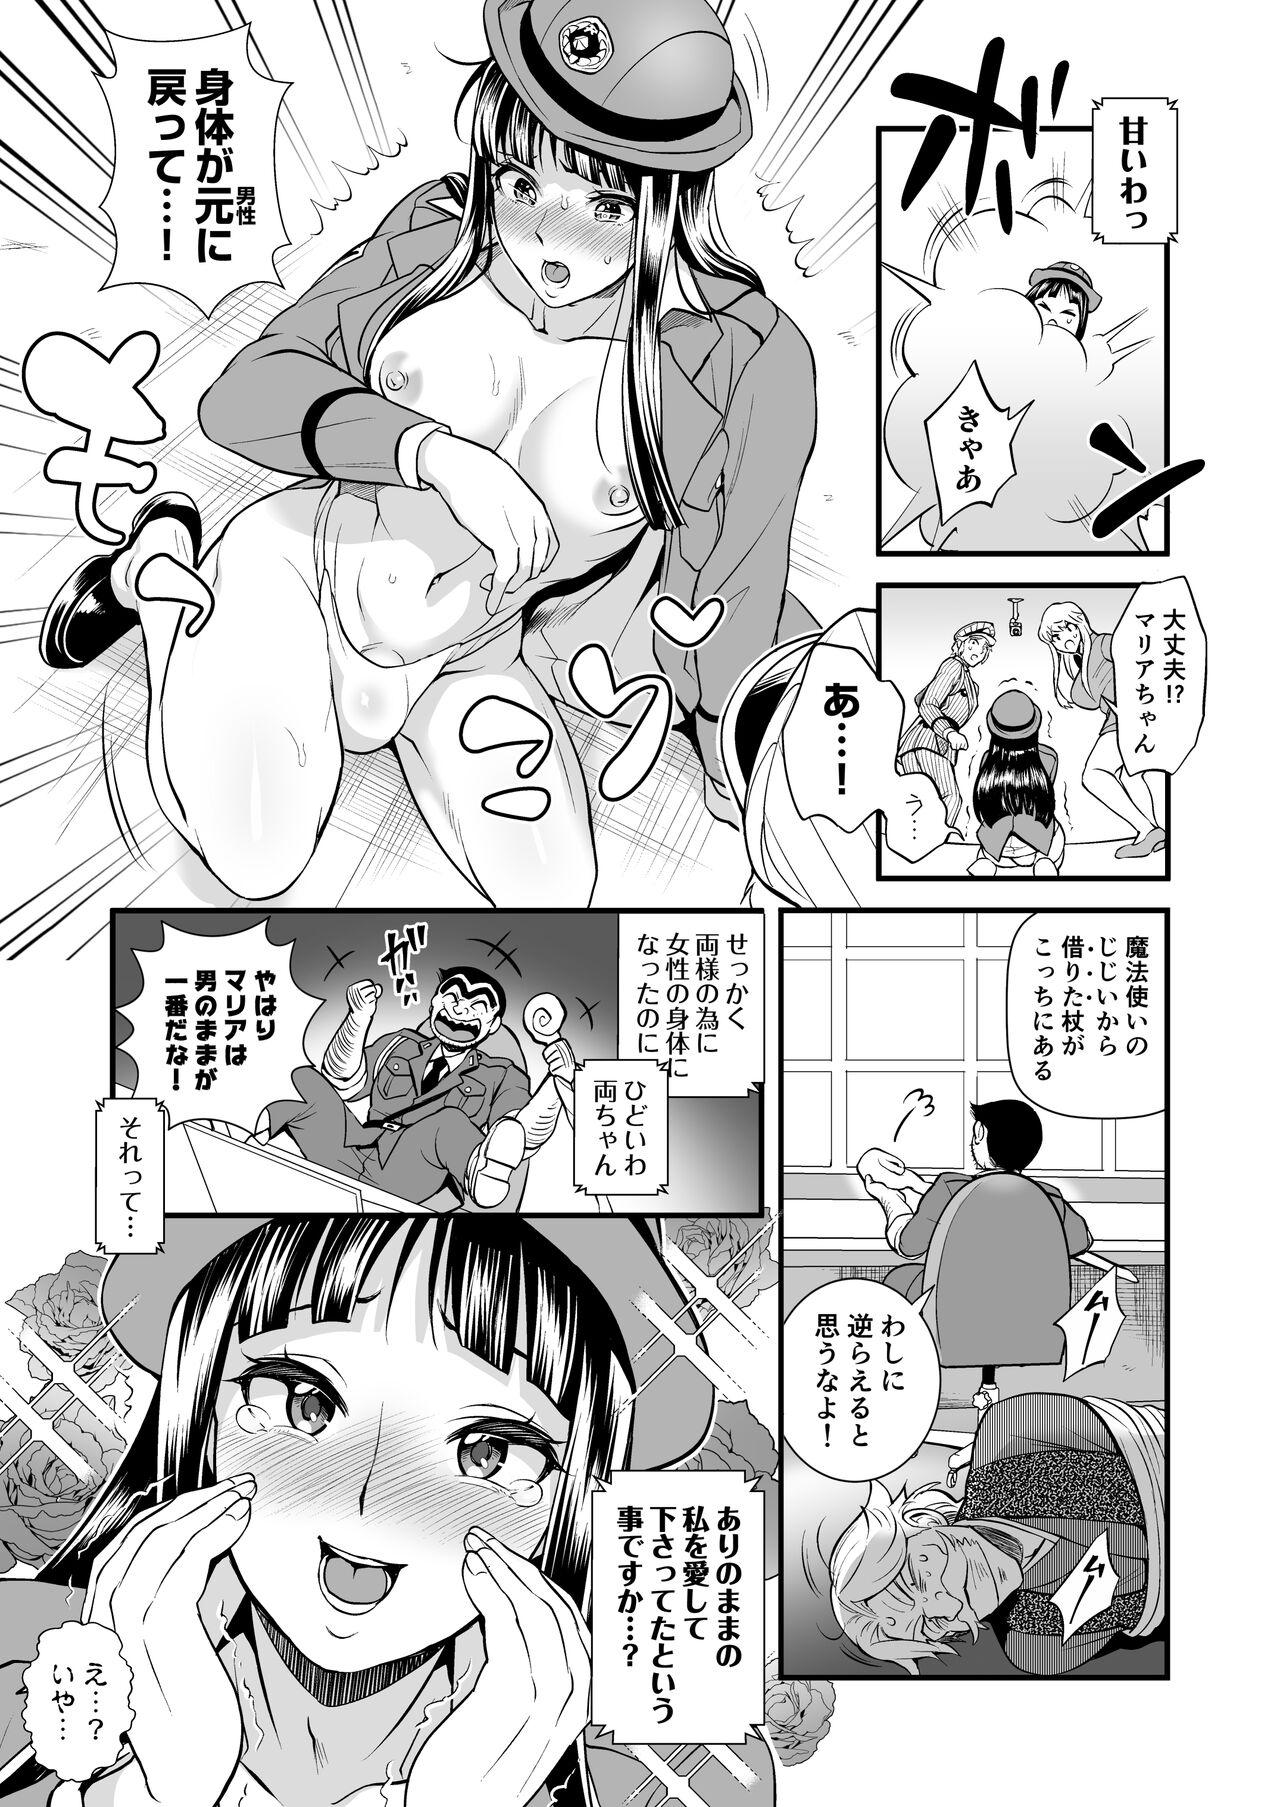 Hardon Volume of the room where Reiko & Maria & Nakagawa can't leave unless they do something crazy - Kochikame Dominate - Page 9